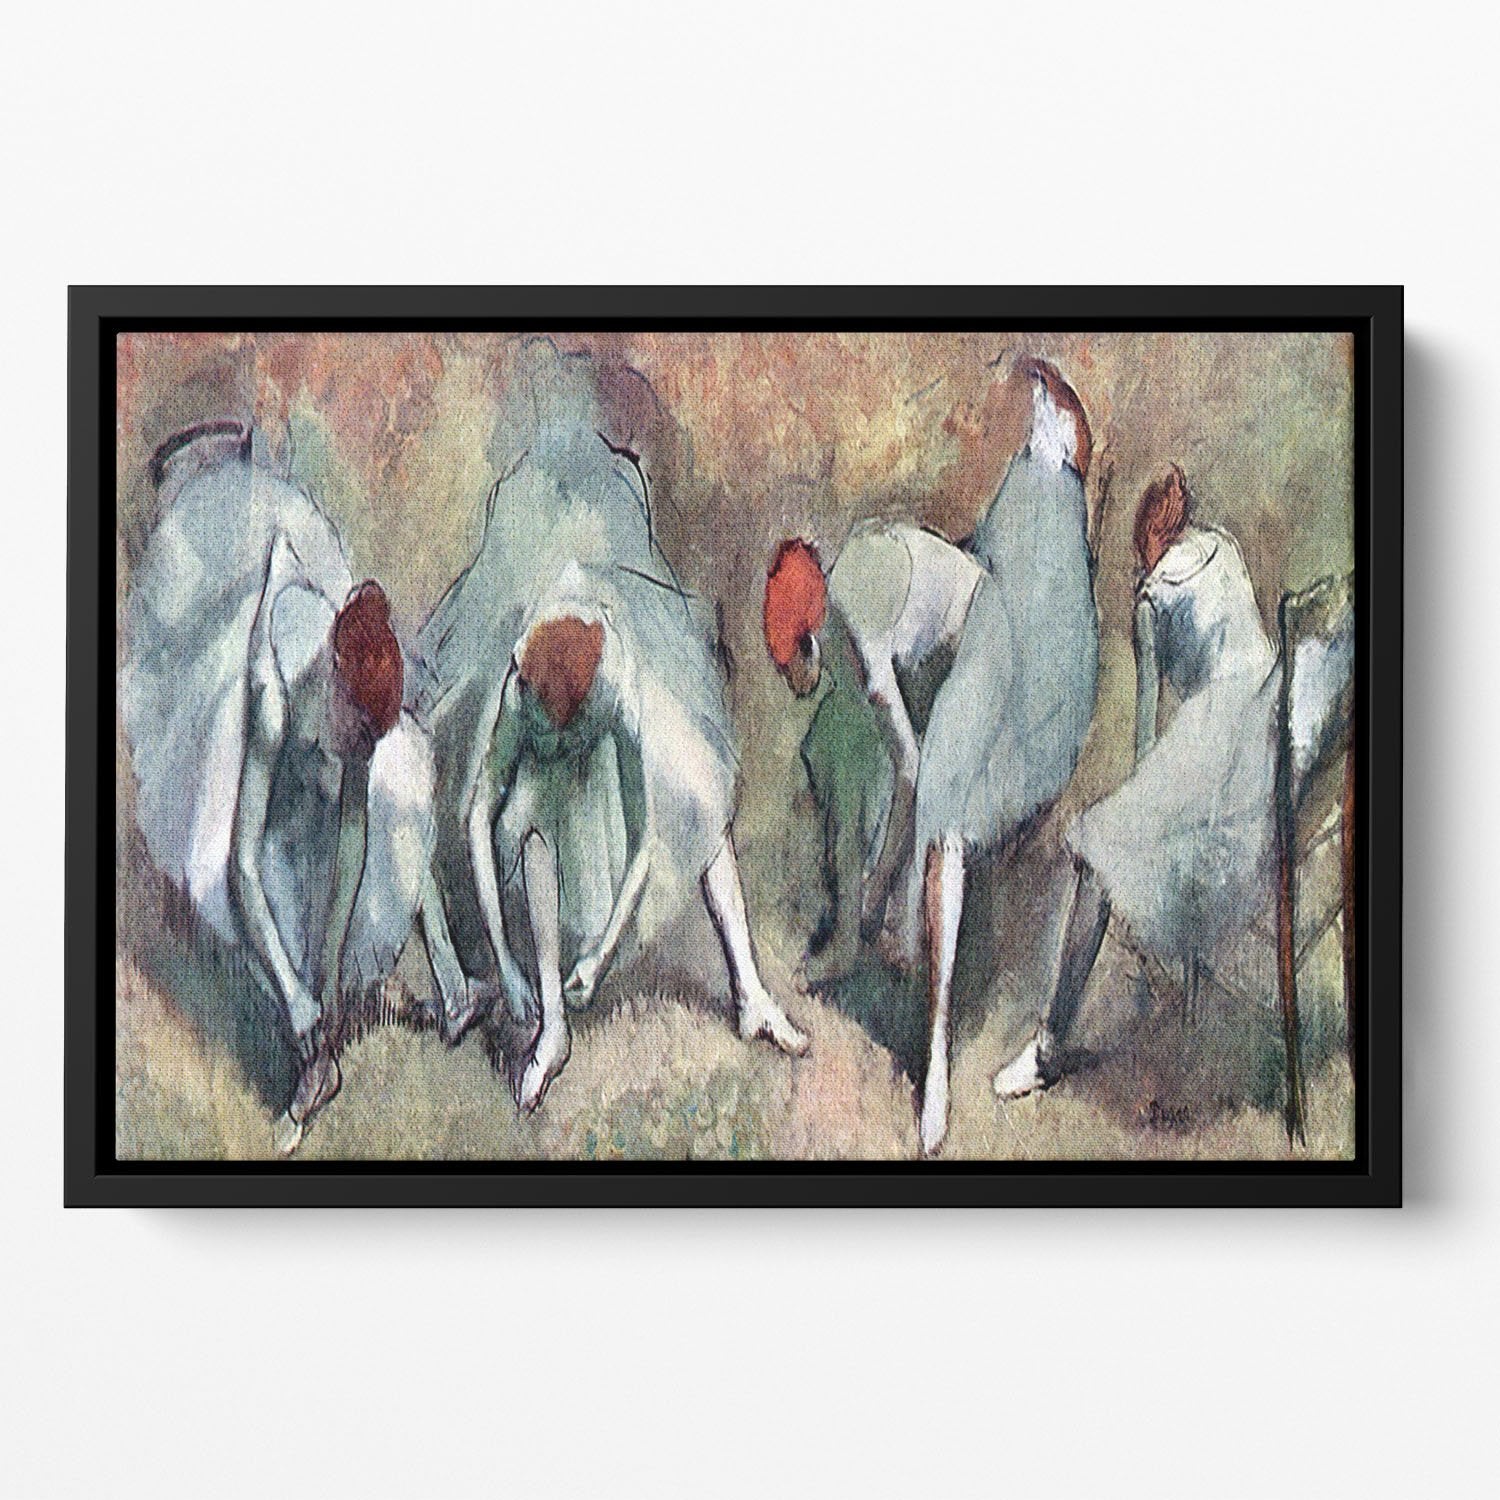 Dancers lace their shoes by Degas Floating Framed Canvas